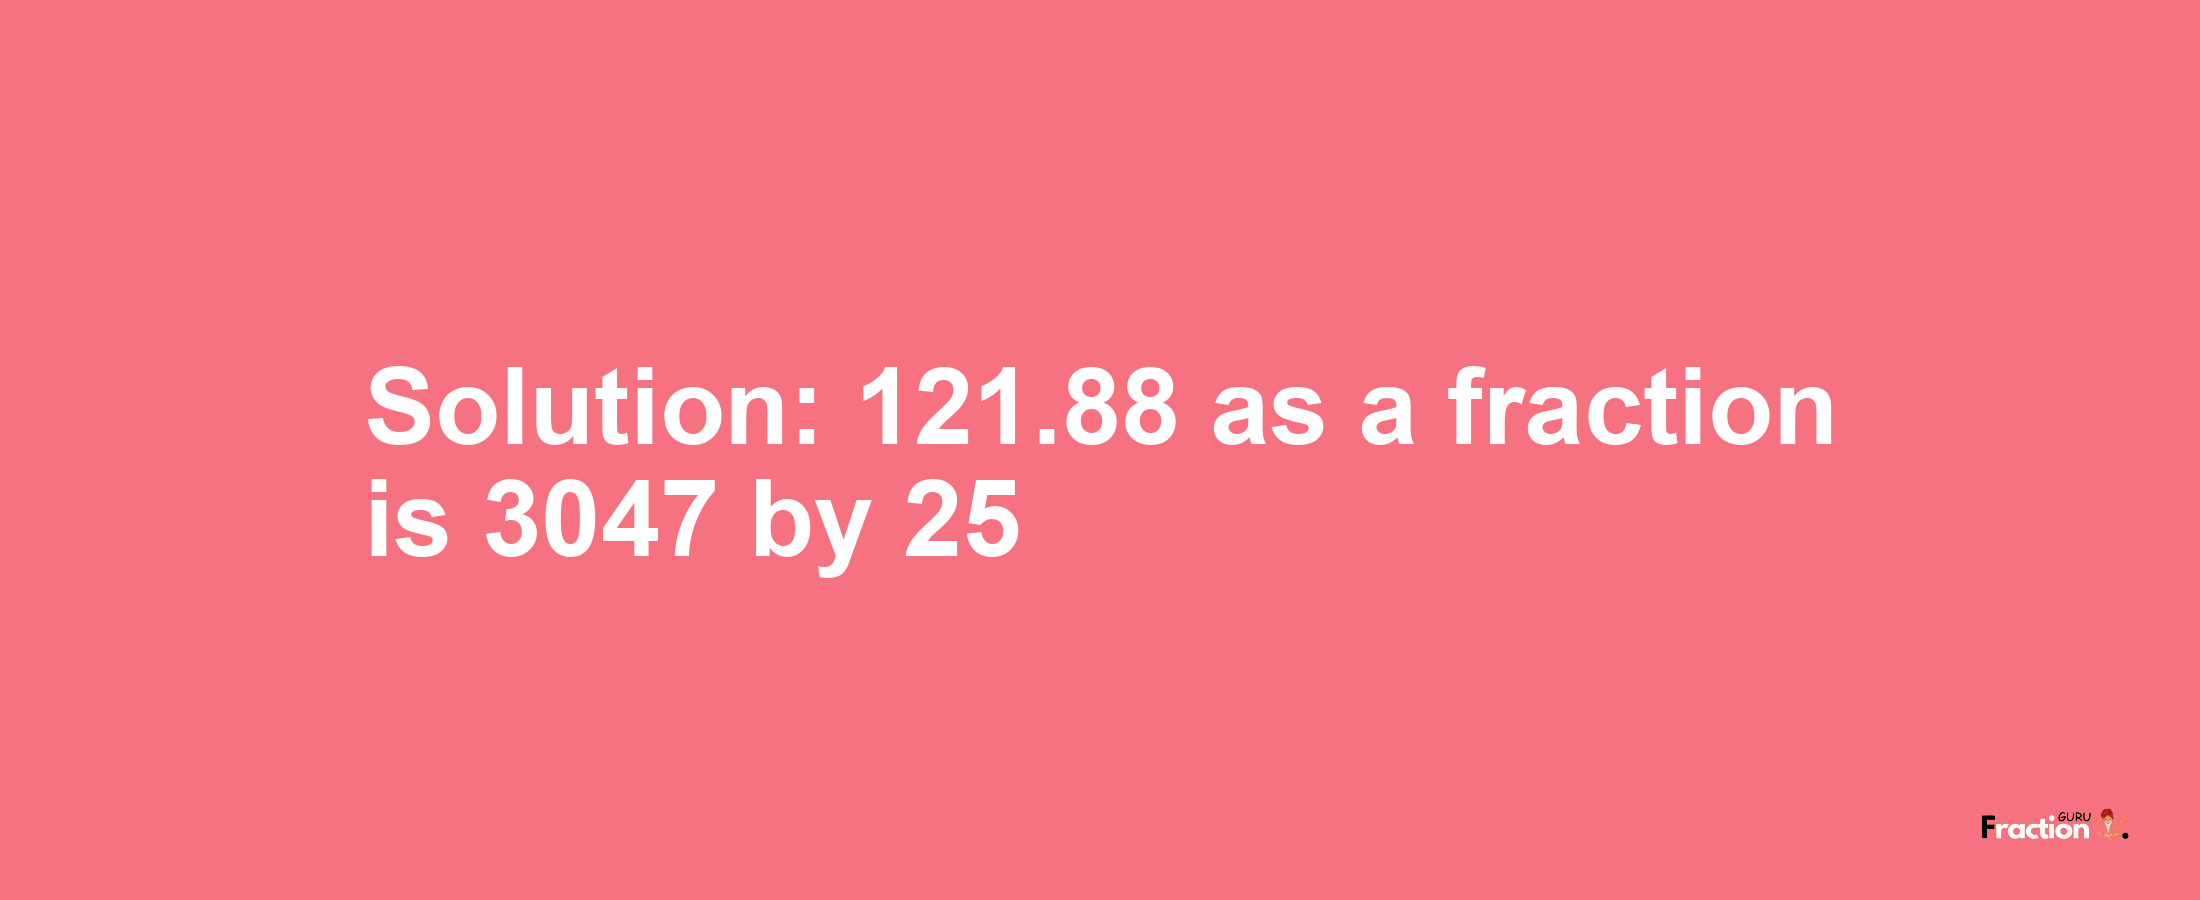 Solution:121.88 as a fraction is 3047/25